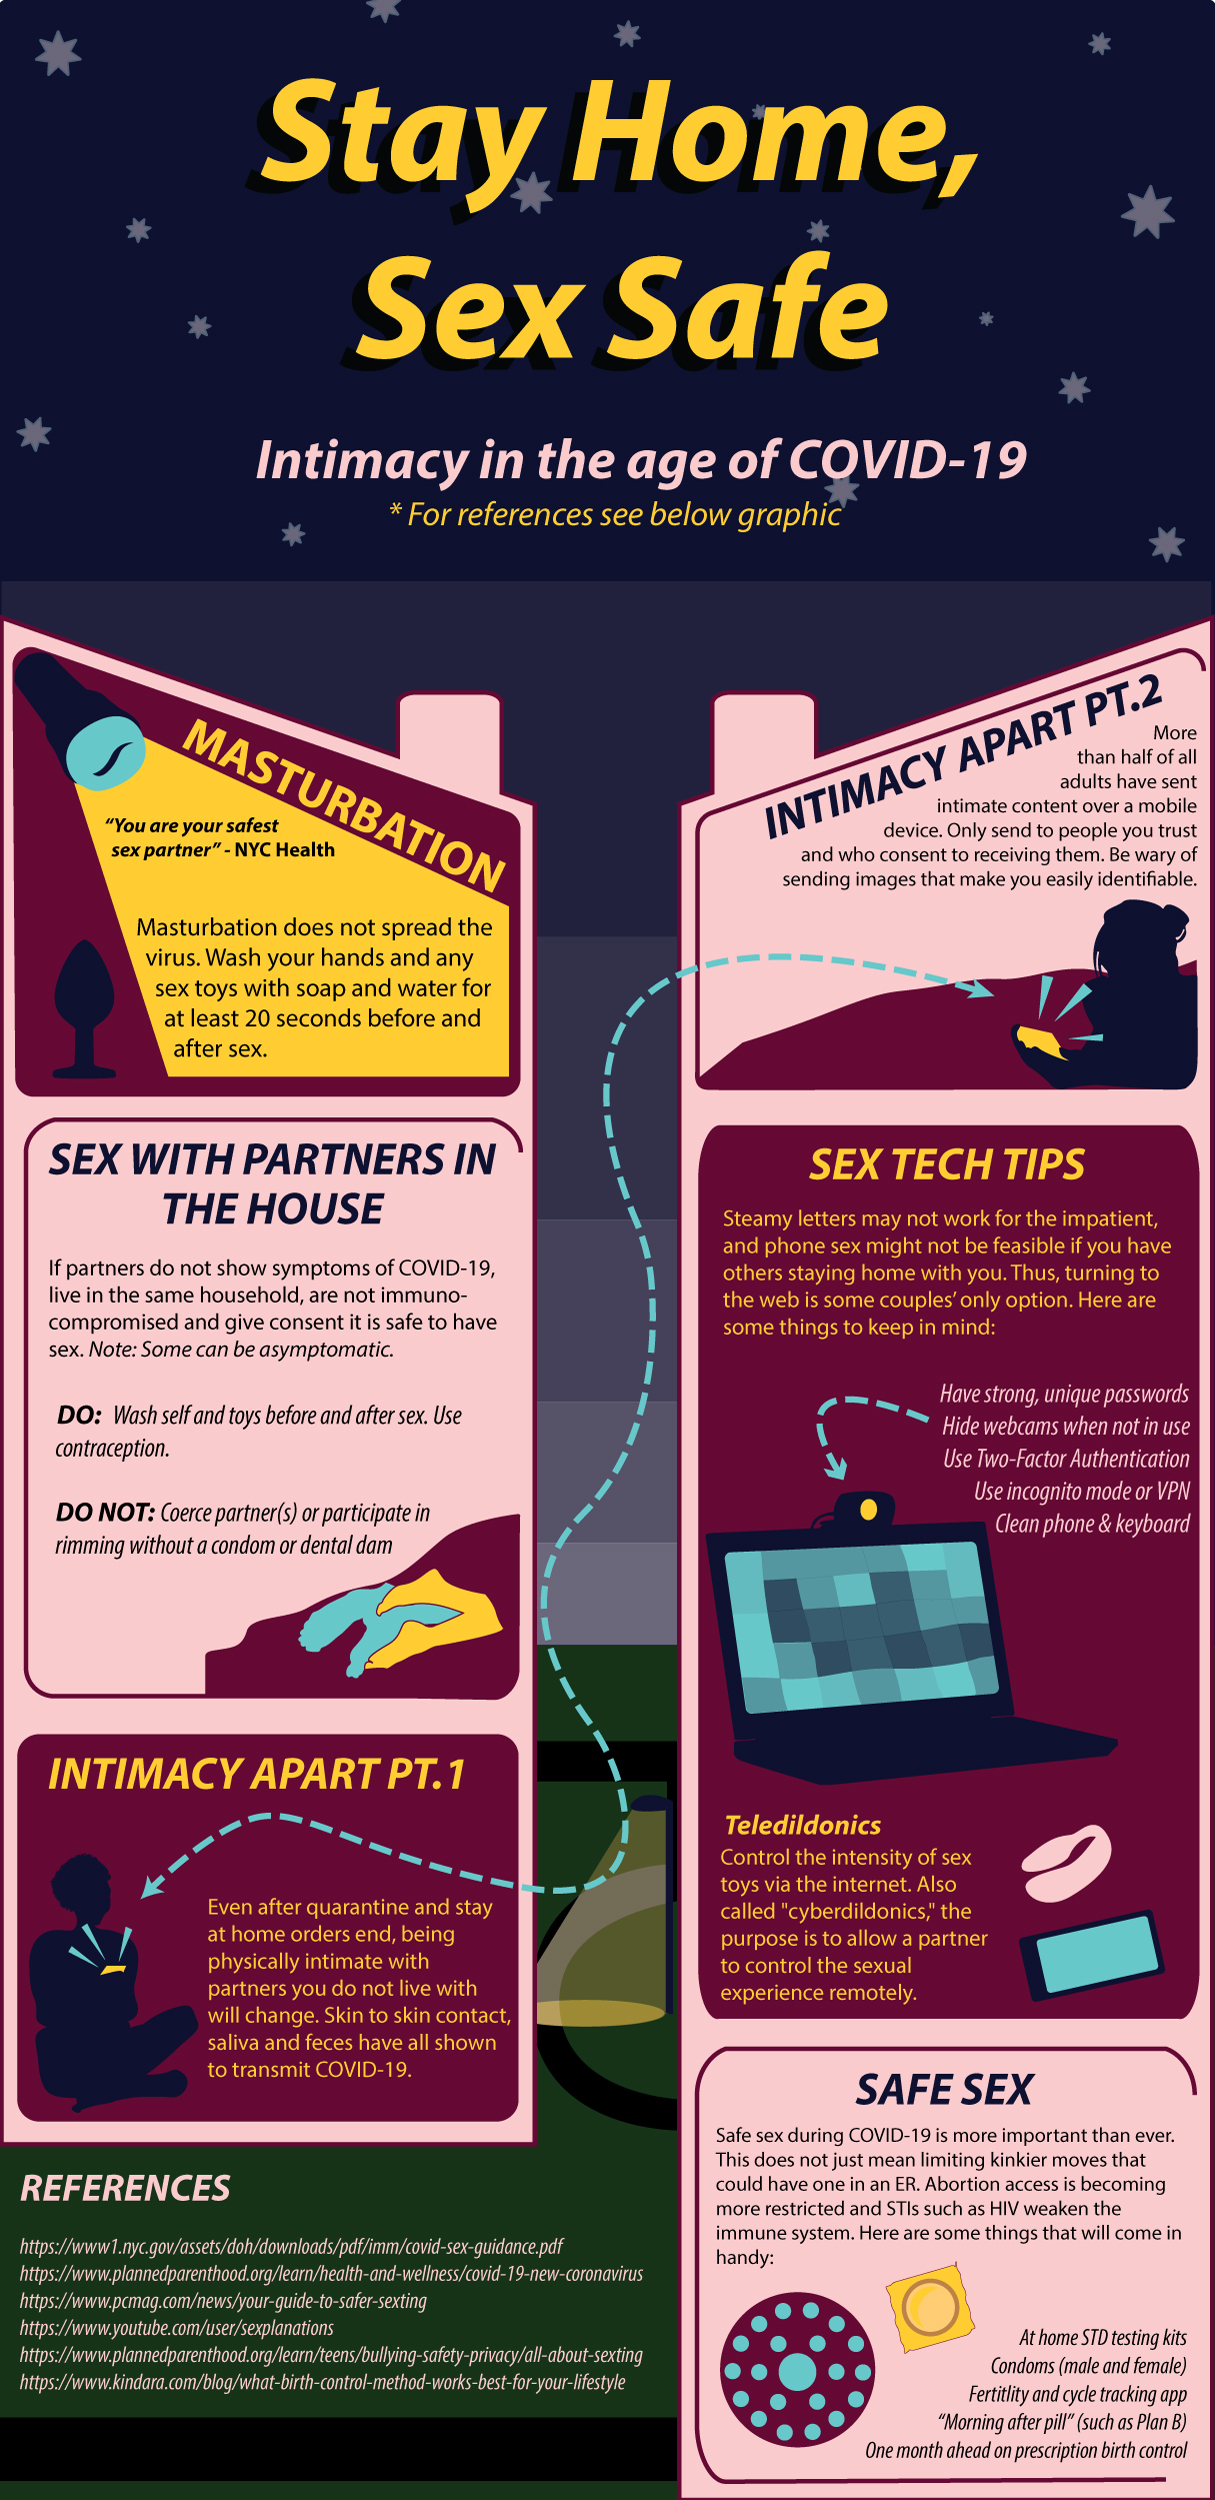 INFOGRAPHIC: Infographic about safe sex and Intimacy during COVID-19. Infographic by The Signal Online Editor, Alyssa Shotwell.